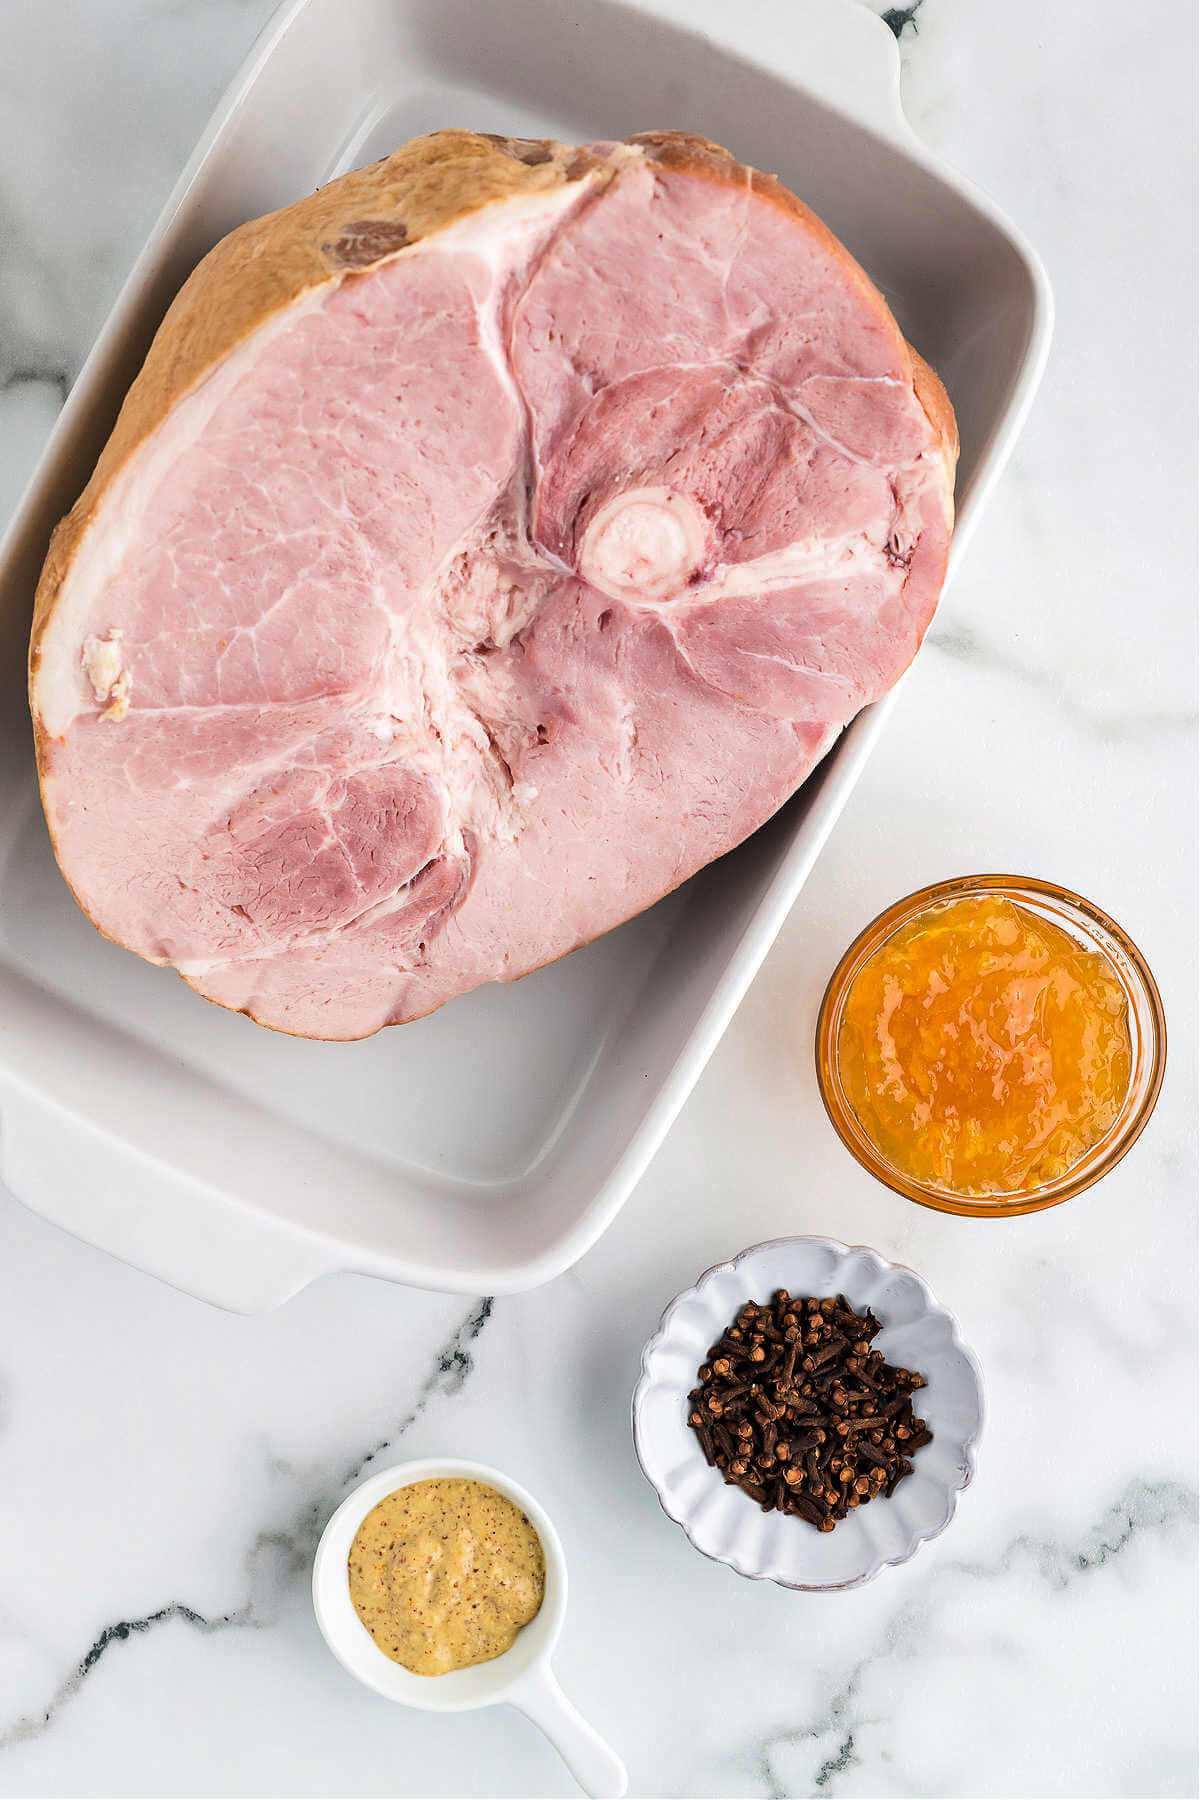 ingredients for making glazed ham on a table.